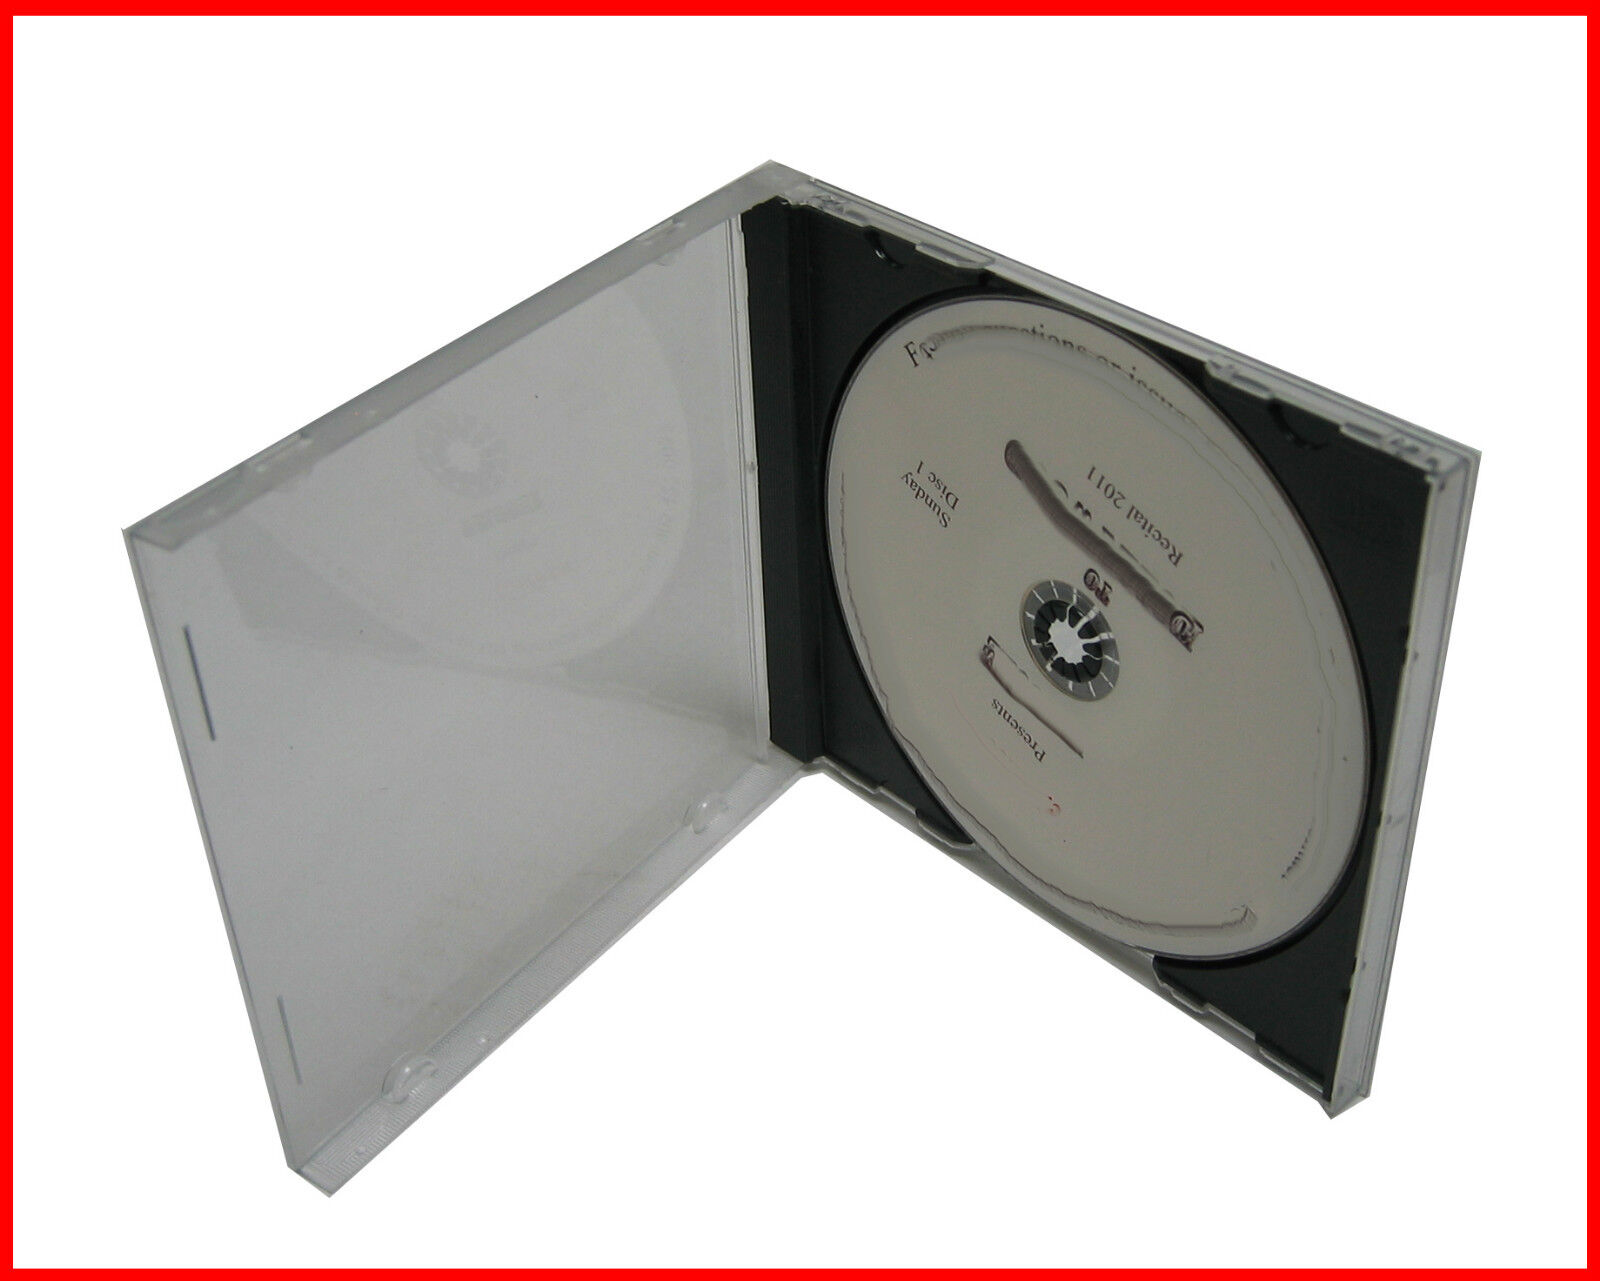 NEW 10.4 mm Single CD Replace Jewel Cases W Black Tray 50 Pk/Set Holds 1 Disc